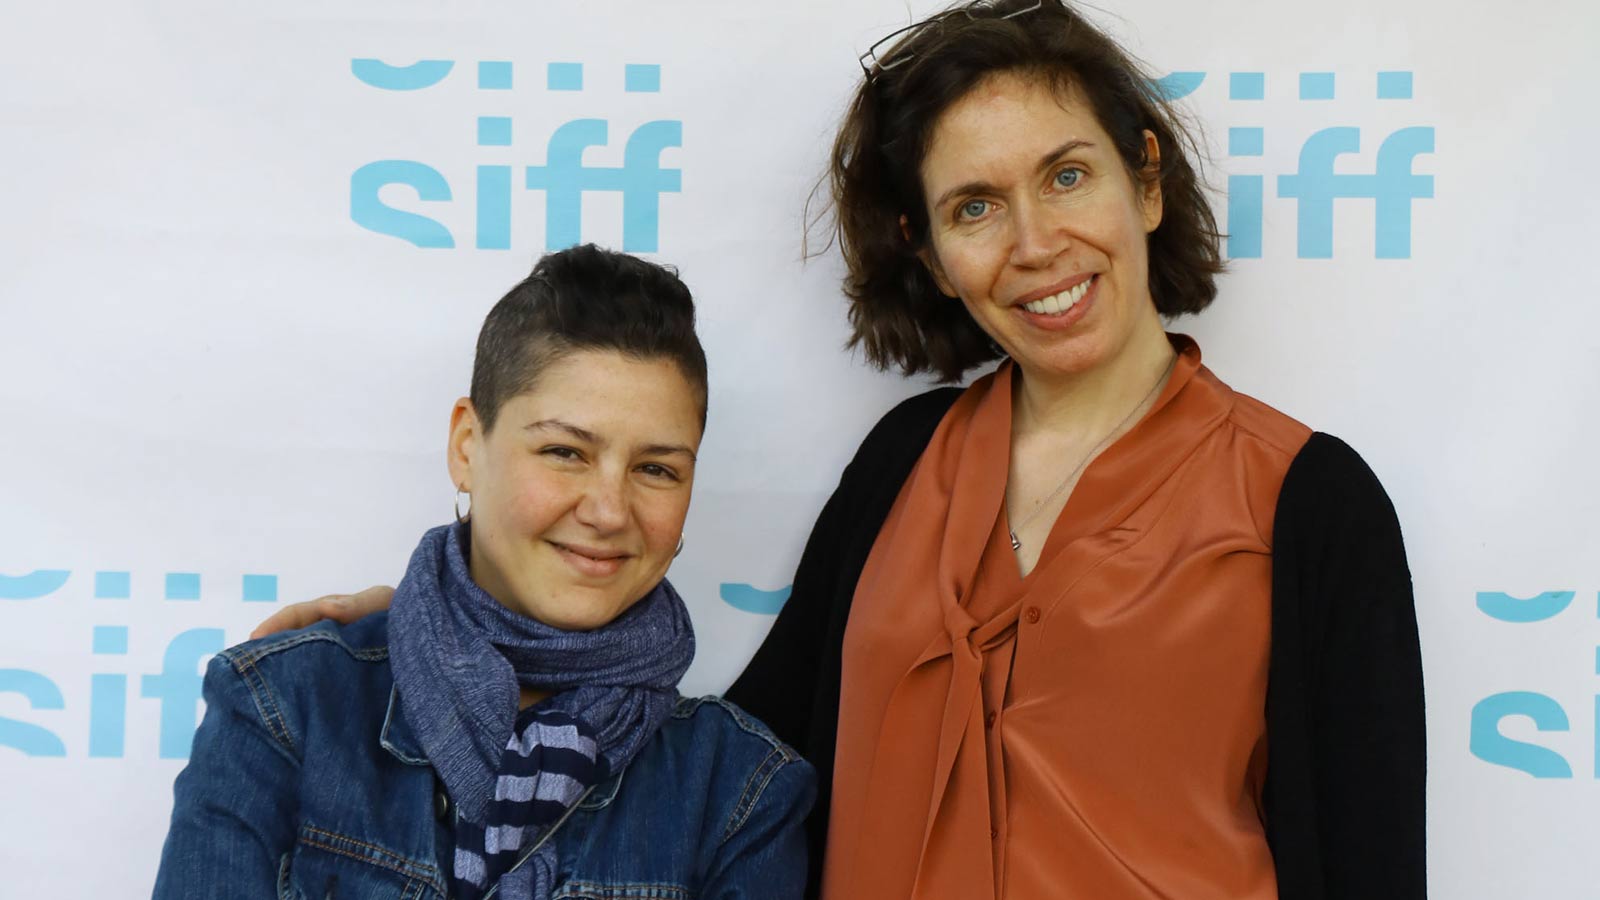 Bahia Allouache and Justine Barda at the SIFF 2017 screening of Investigating Paradise